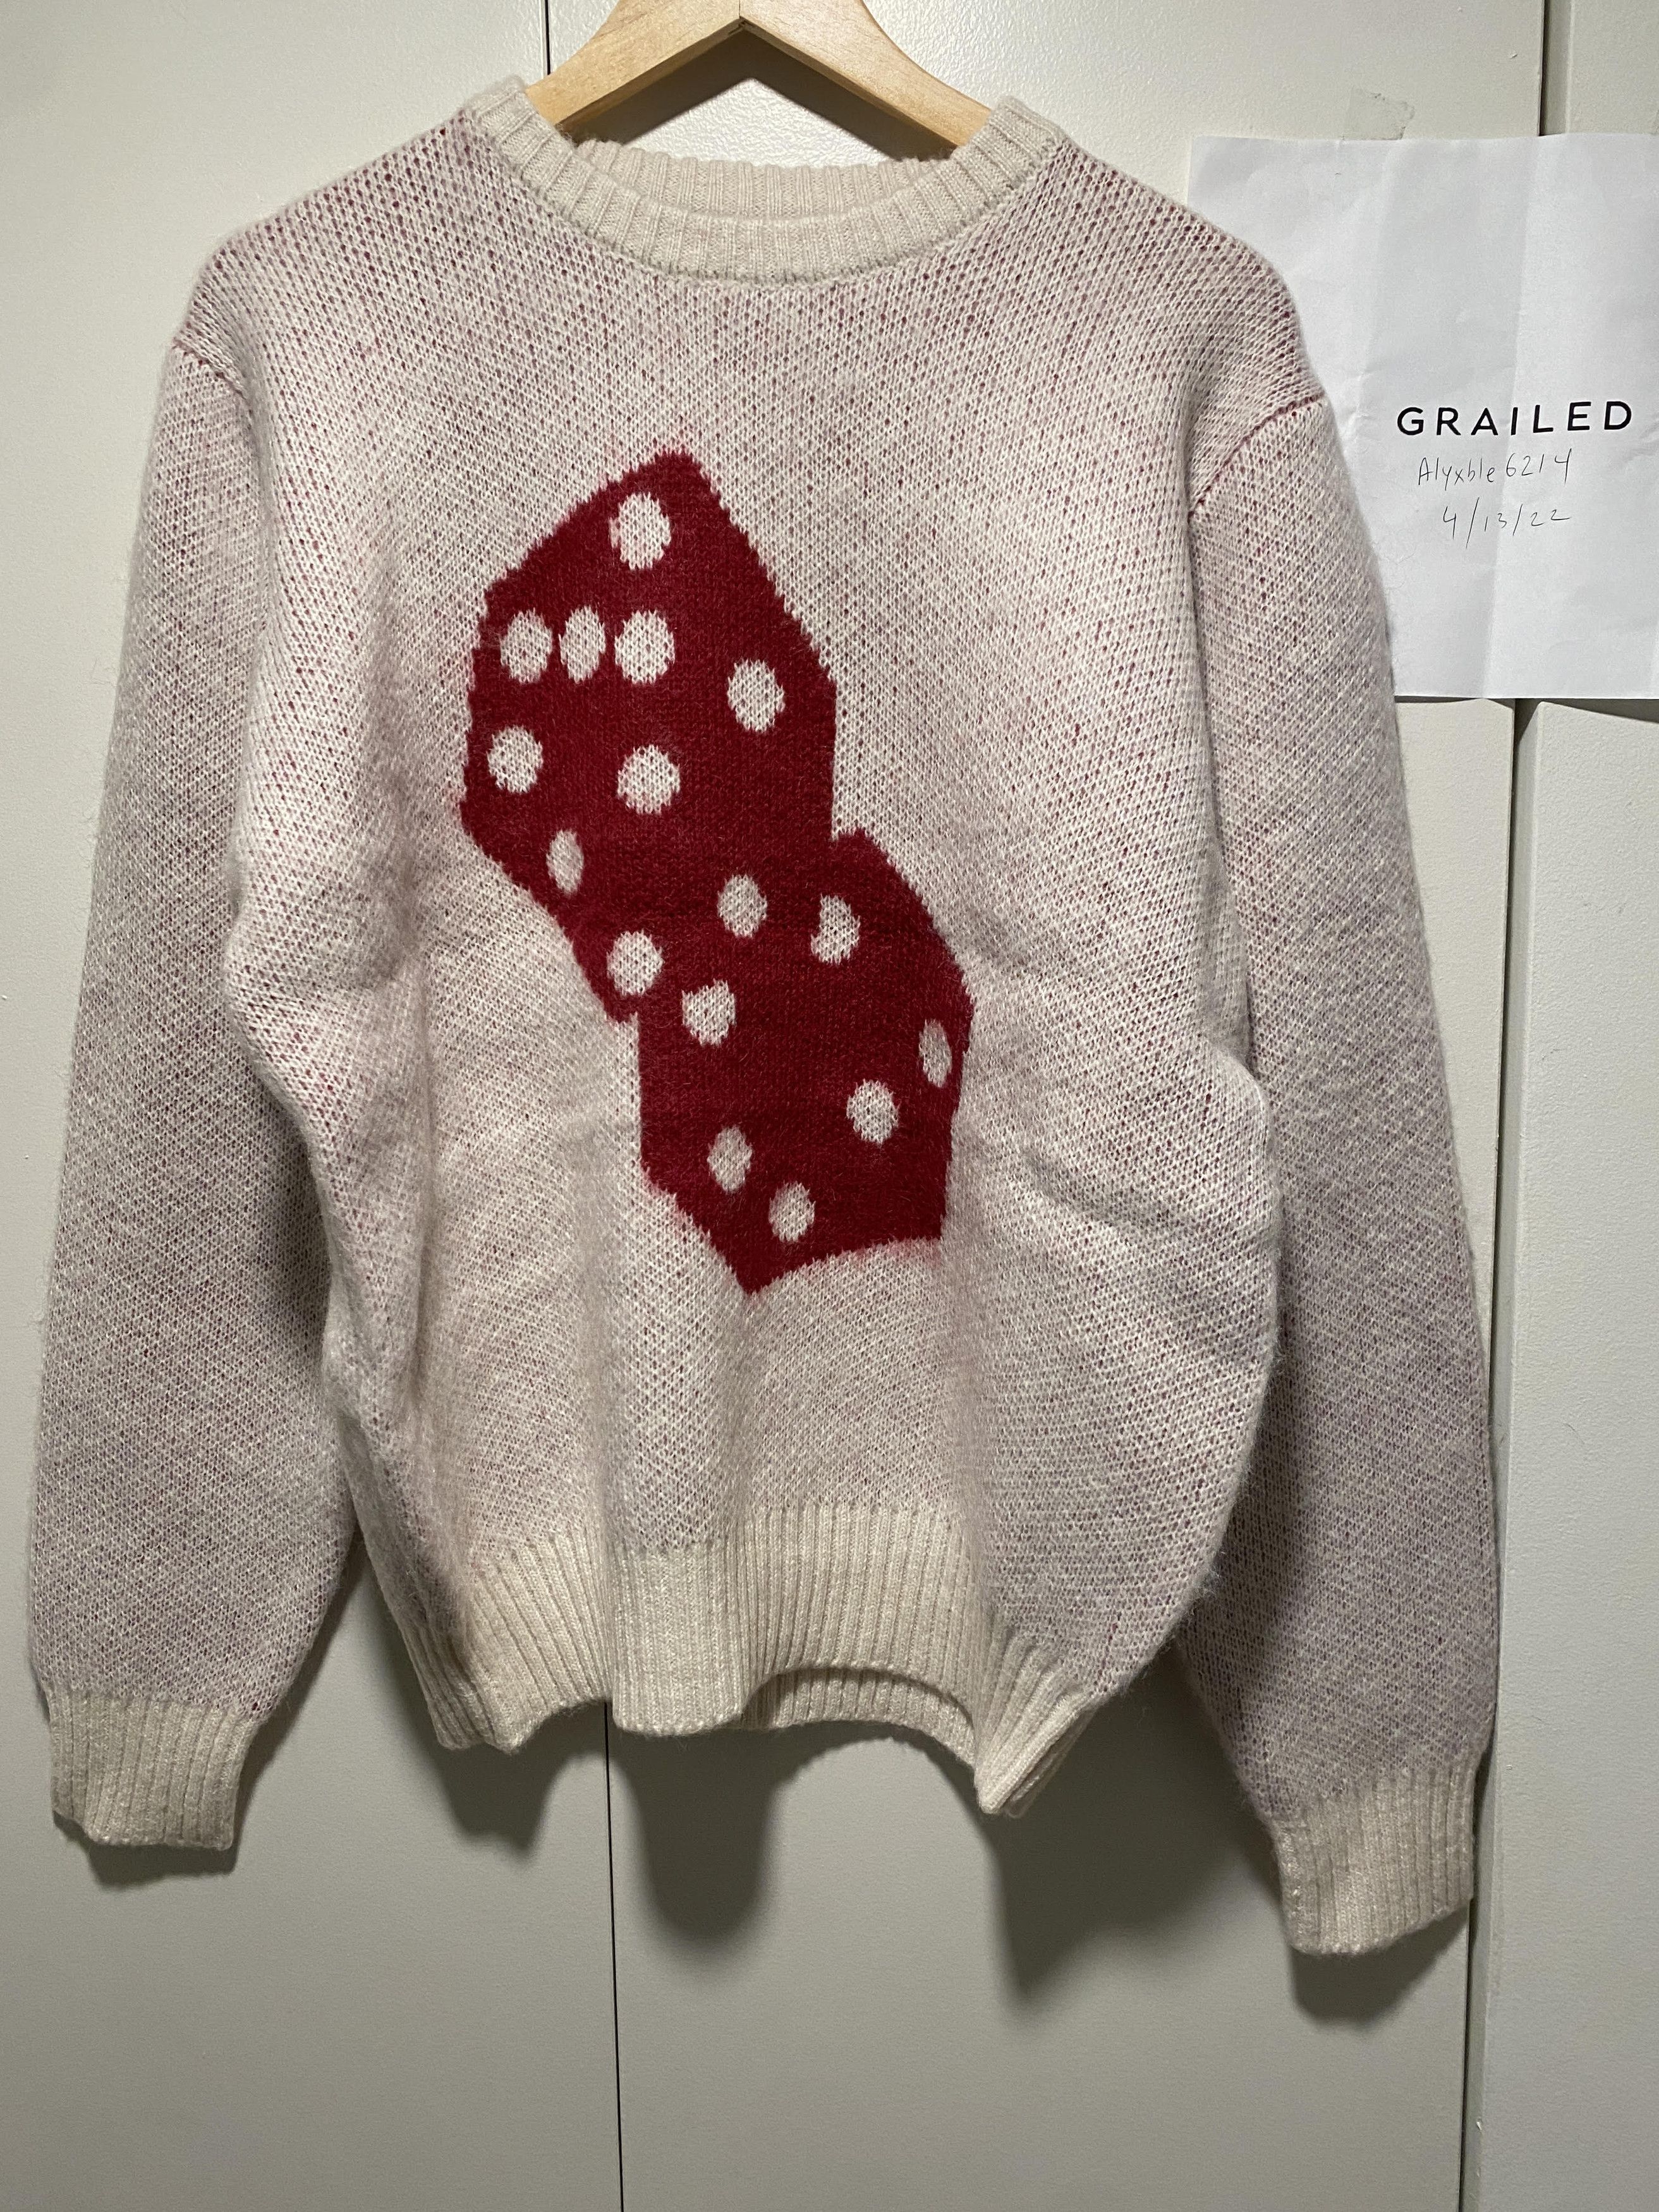 Dice Mohair Sweater Stussy | Grailed